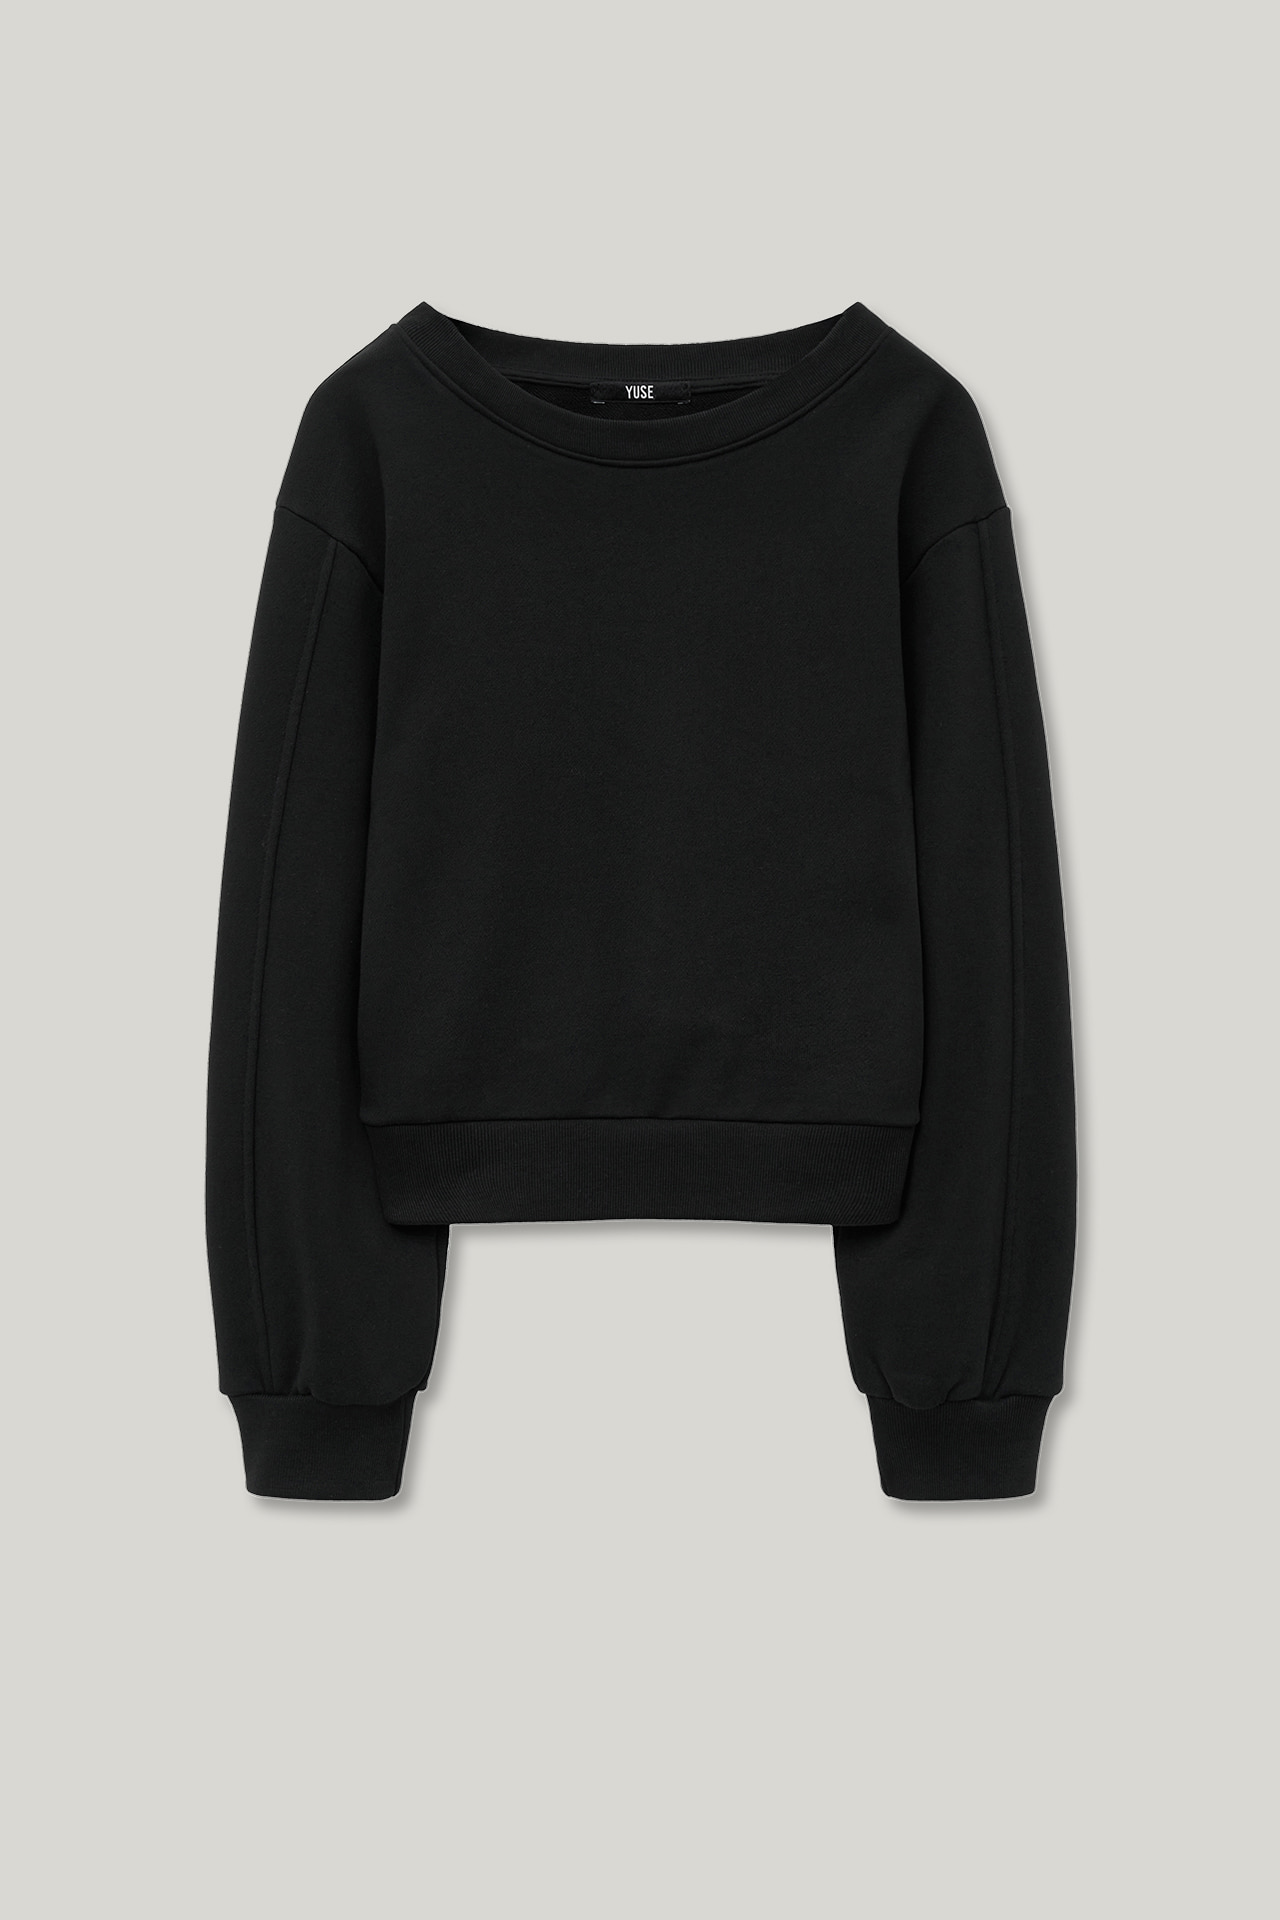 [RE:YUSE] BASIC RECYCLE OFF SHOULDER SWEAT SHIRT TOP - BLACK